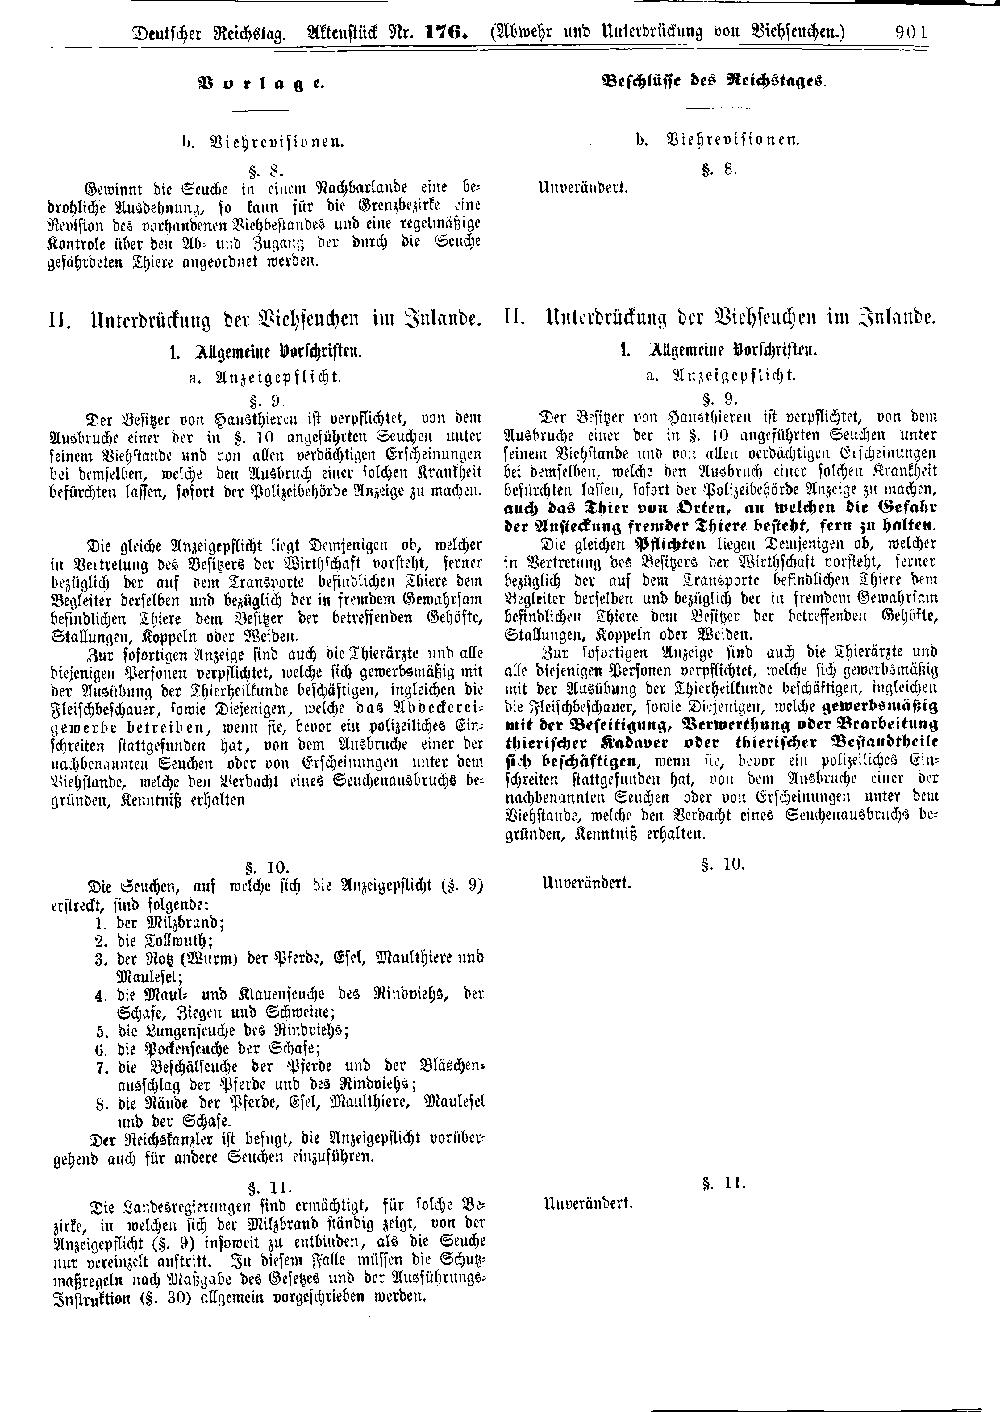 Scan of page 901